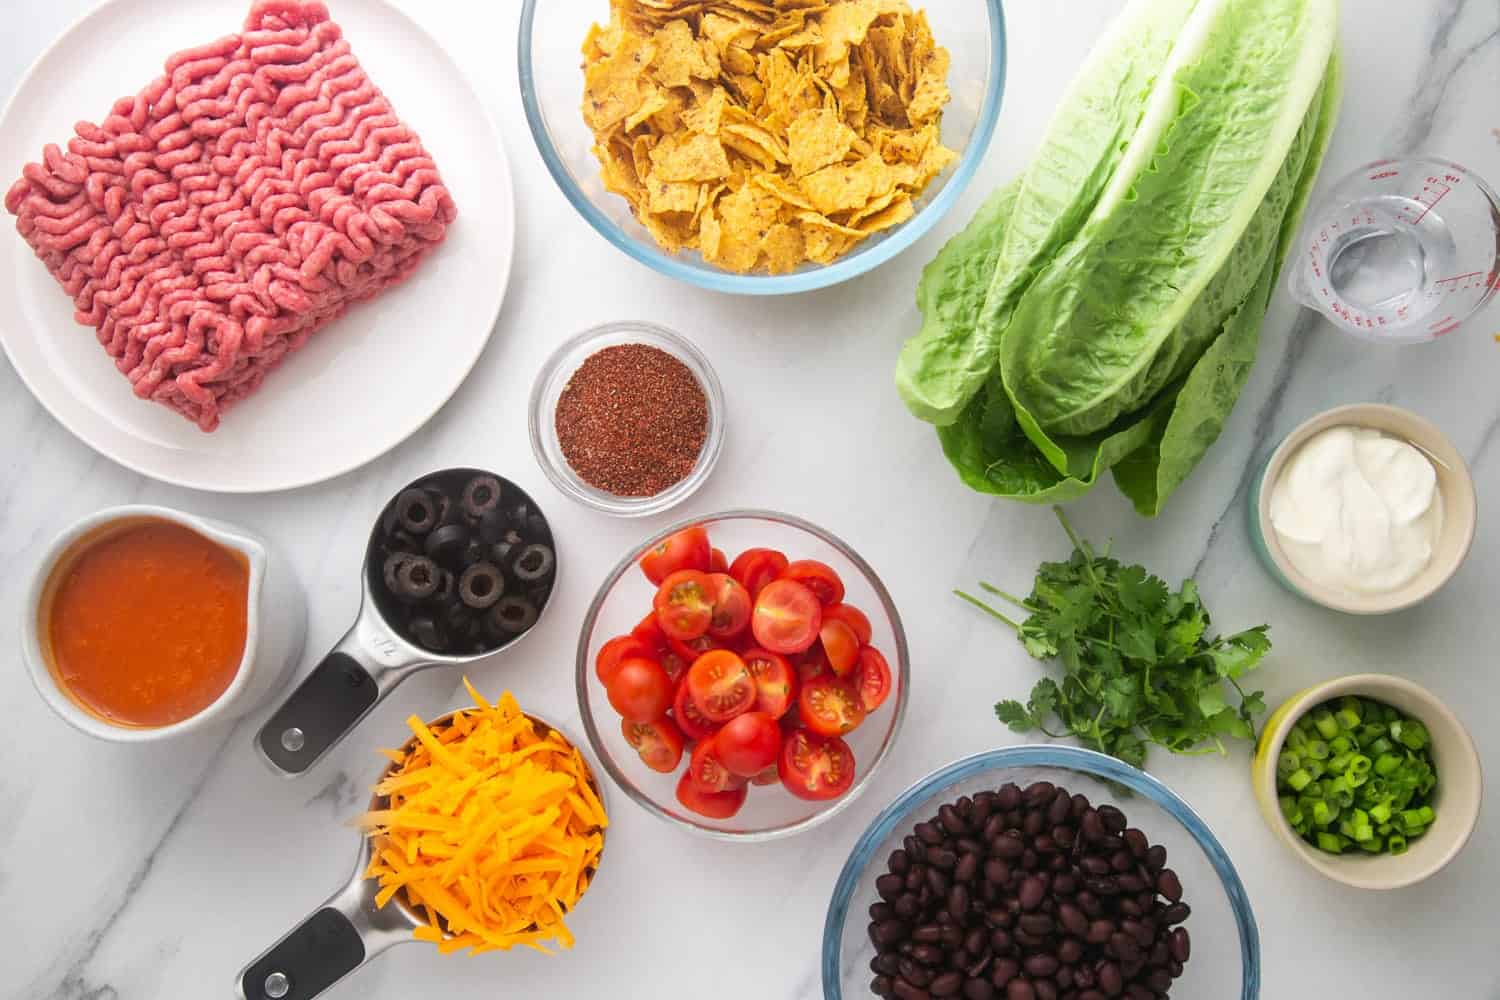 Ingredients needed for making Frito taco salad including ground beef, black beans, lettuce, cherry tomatoes, cheese, spices, and doritos.